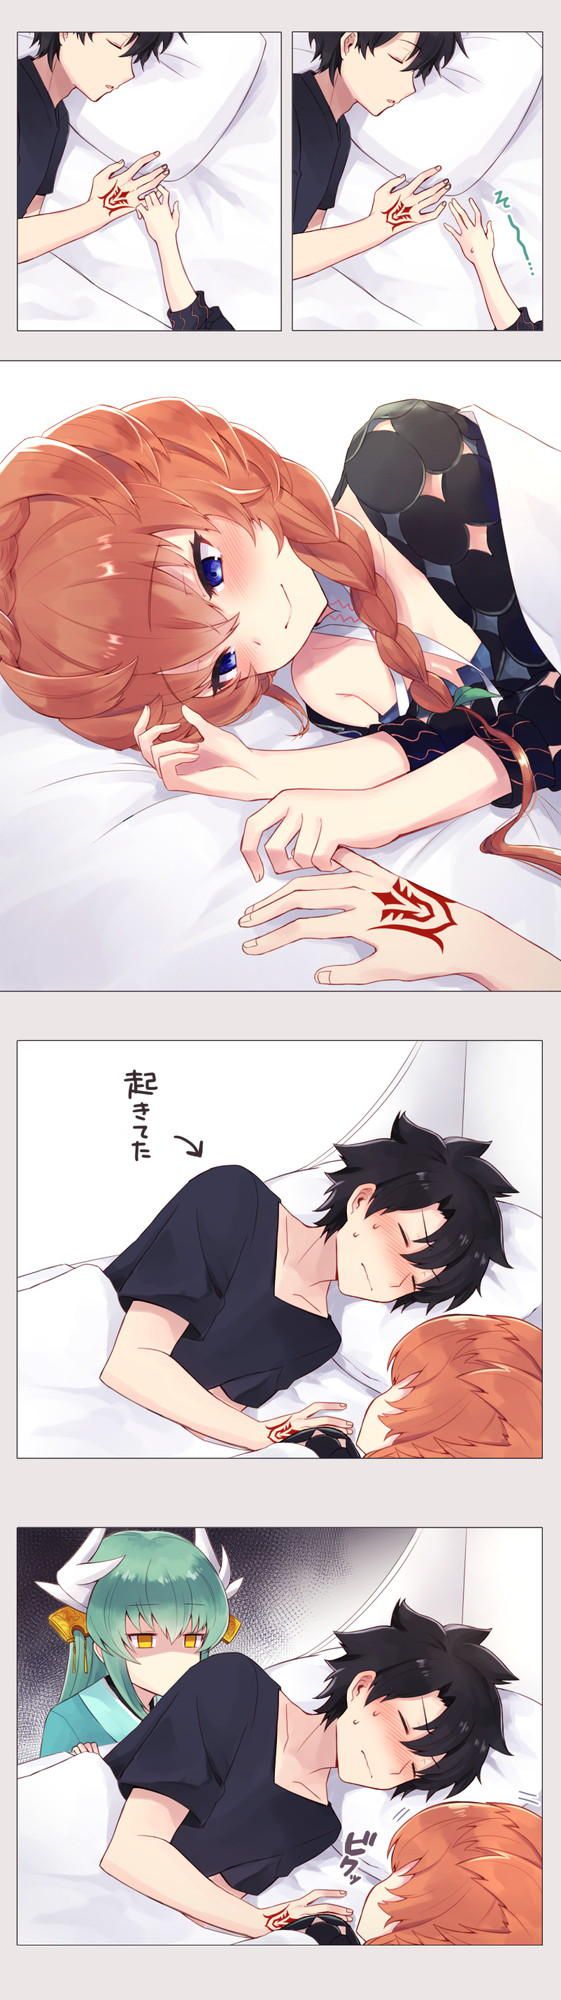 "Let's stay with you♥ are you too loved or sick... Yandere, her peep... 46